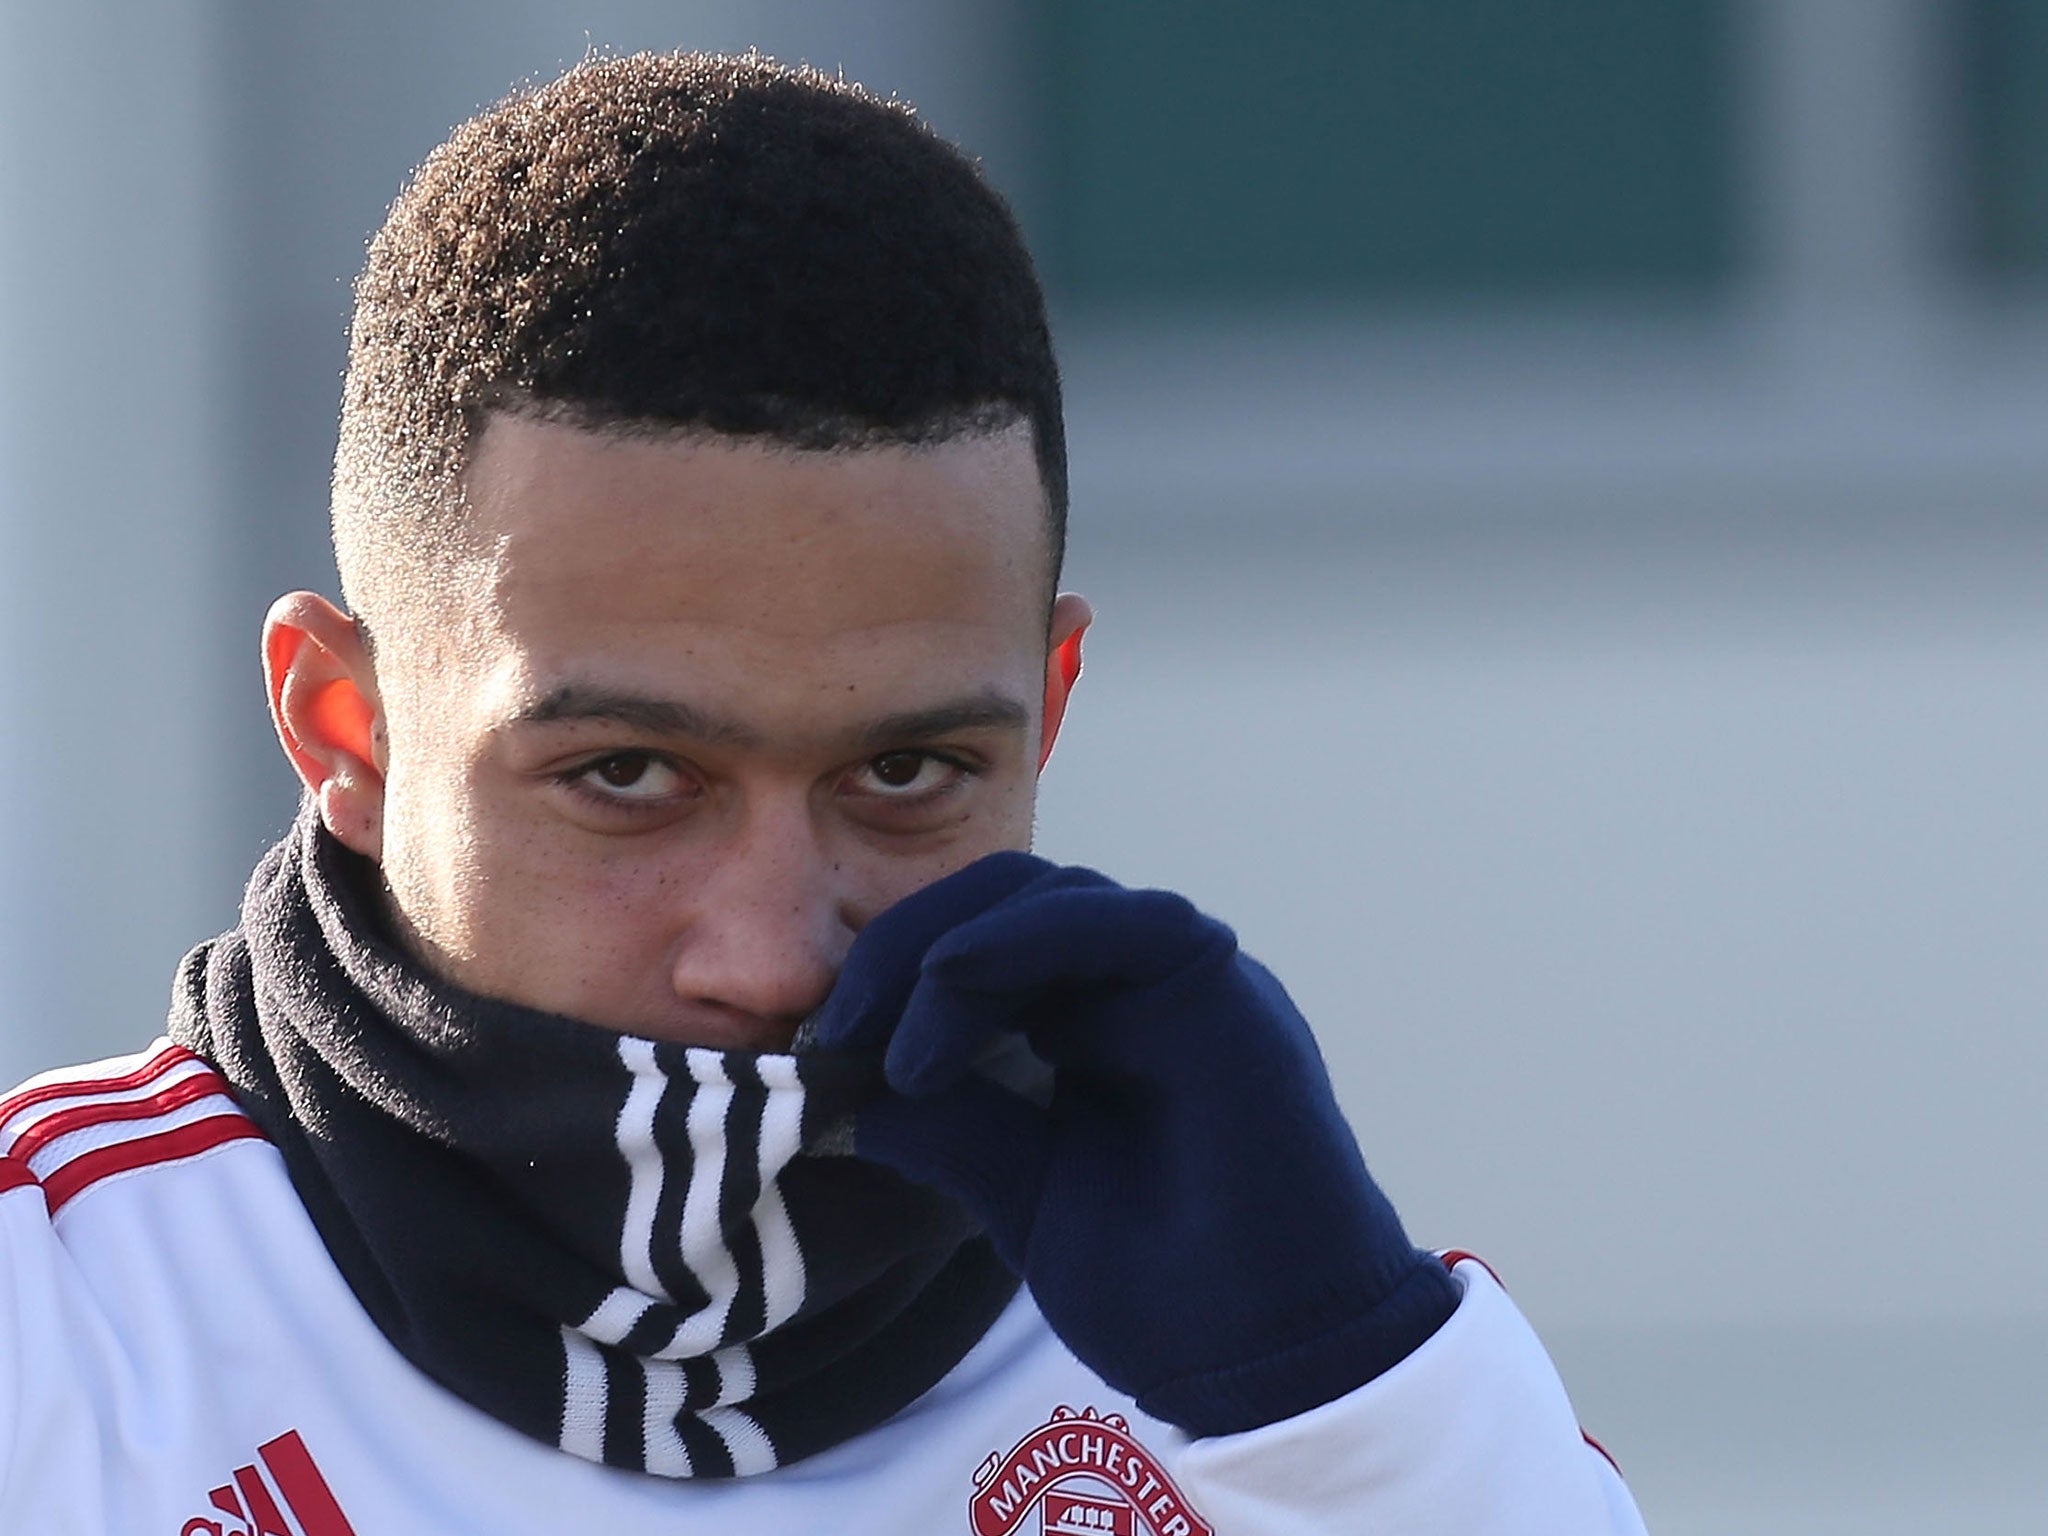 Depay No-Show Angers Lyon Boss | beIN SPORTS